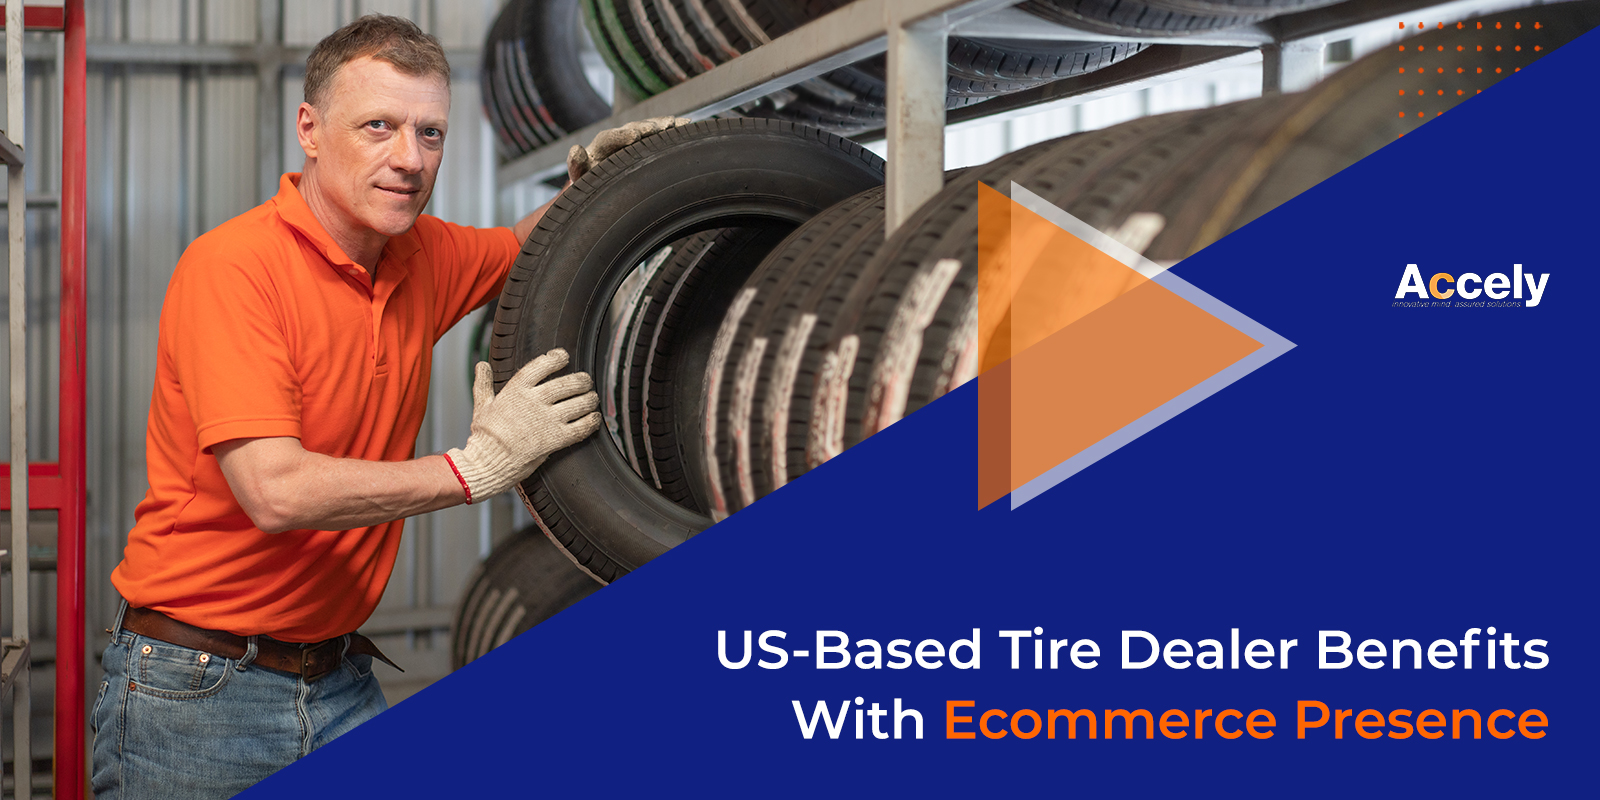 US-Based Tire Dealer Benefits With Ecommerce Presence